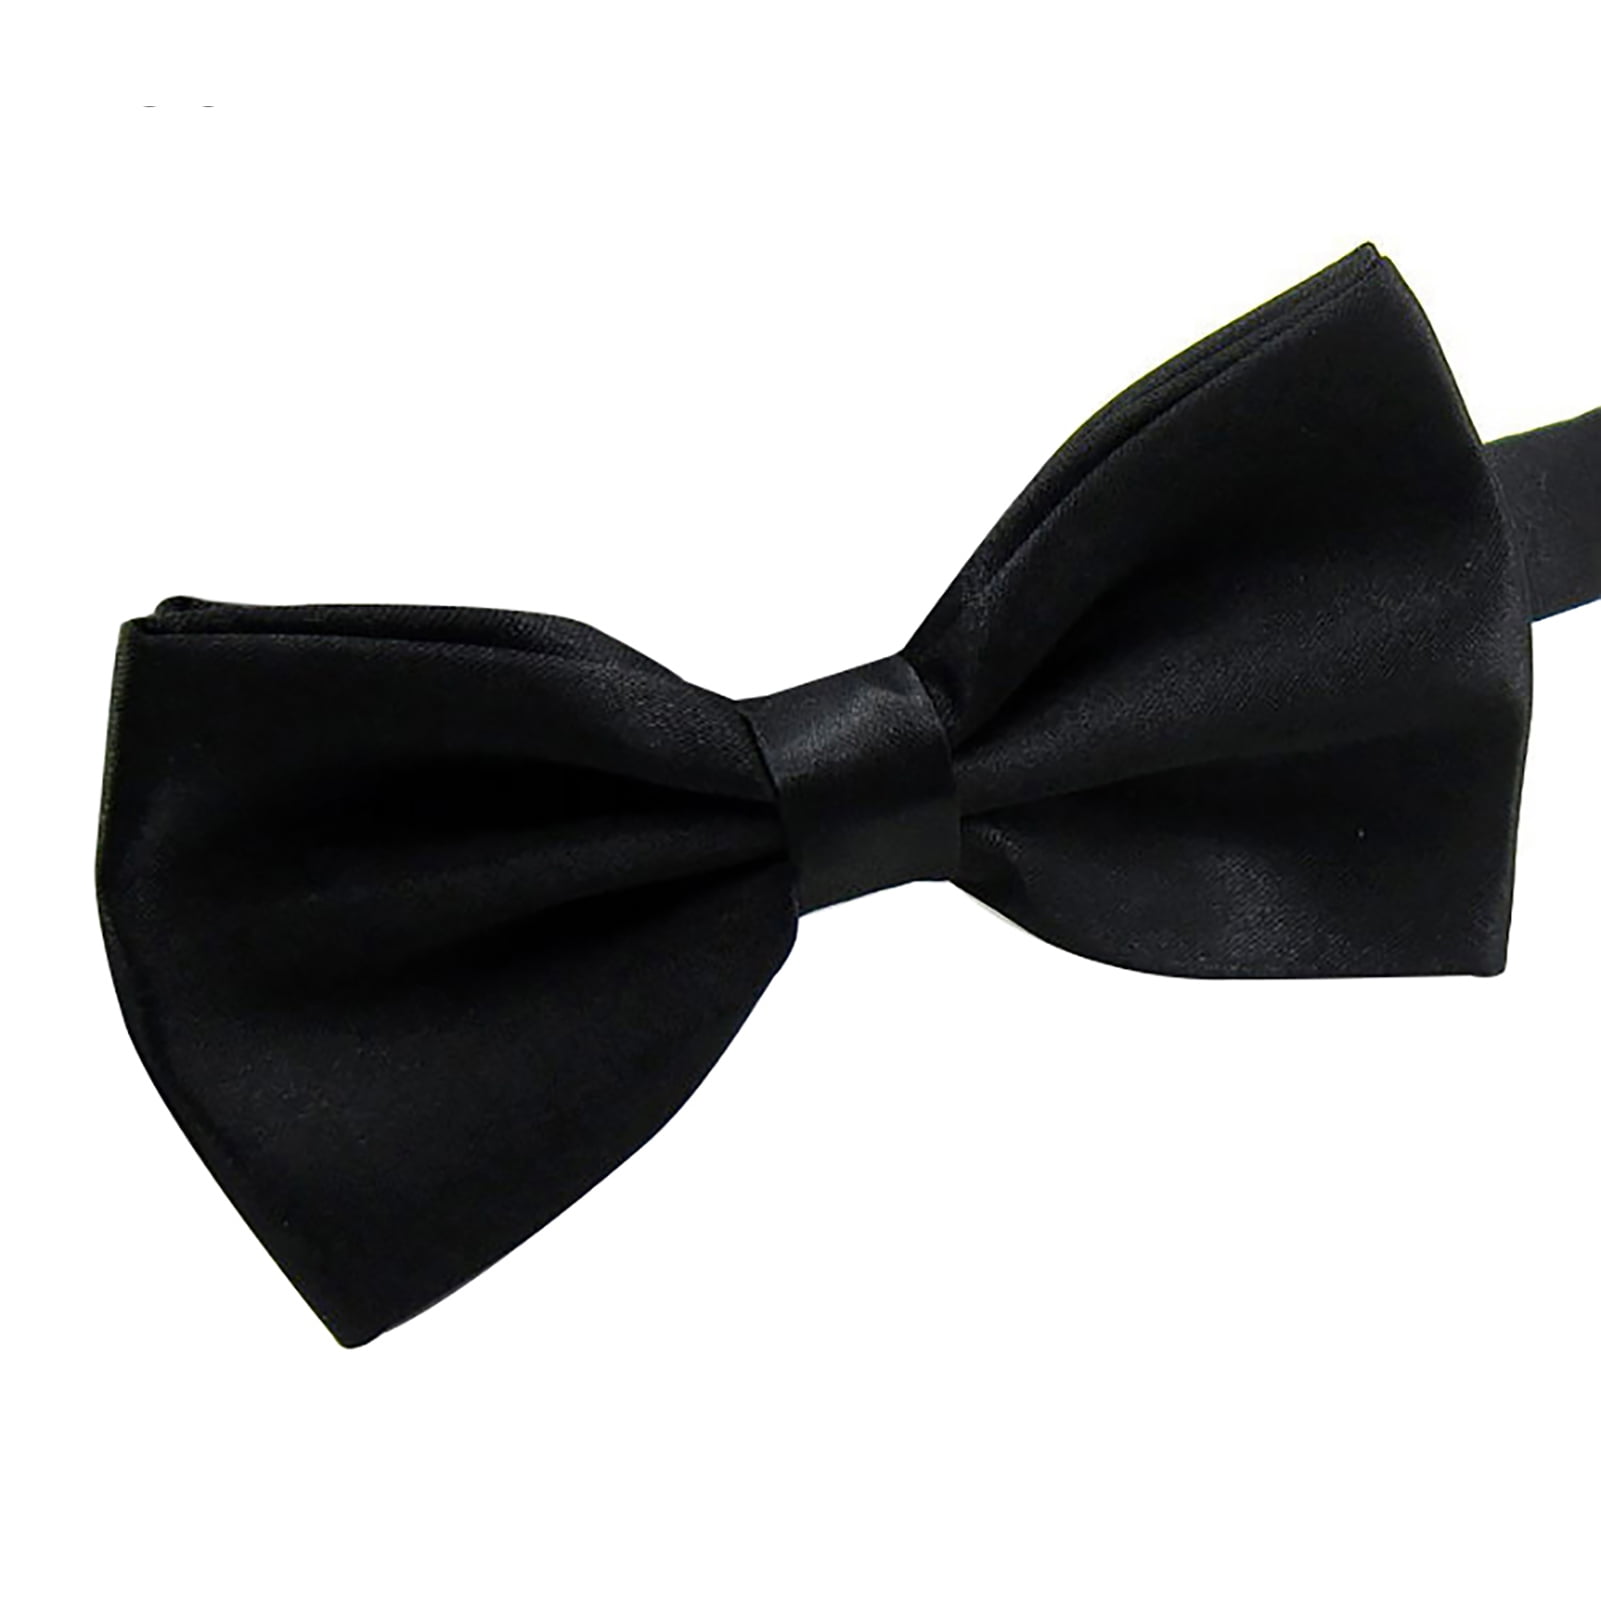 Music Notes Bow Tie Mens Bowtie Pre-Tied Adjustable Length Birthday Gift Formal Fun Occasions 